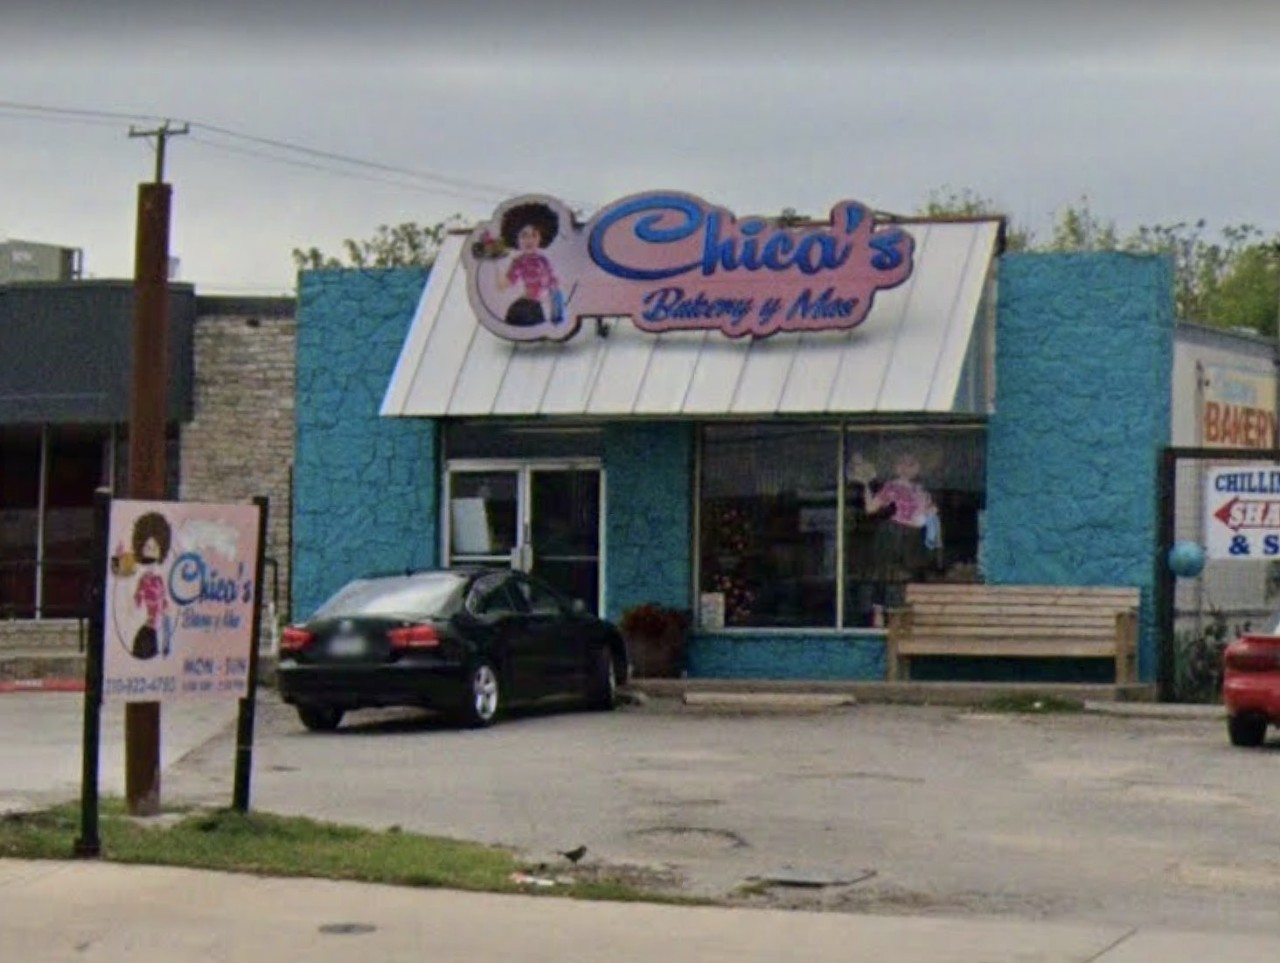 Chico’s Bakery
9155 S Zarzamora St, (210) 922-4793
You’ll want to stop by this hidden gem in the South Side for fresh buñuelos before they depart for the season. If not, you can try the churros year-round.
Photo via Google Maps